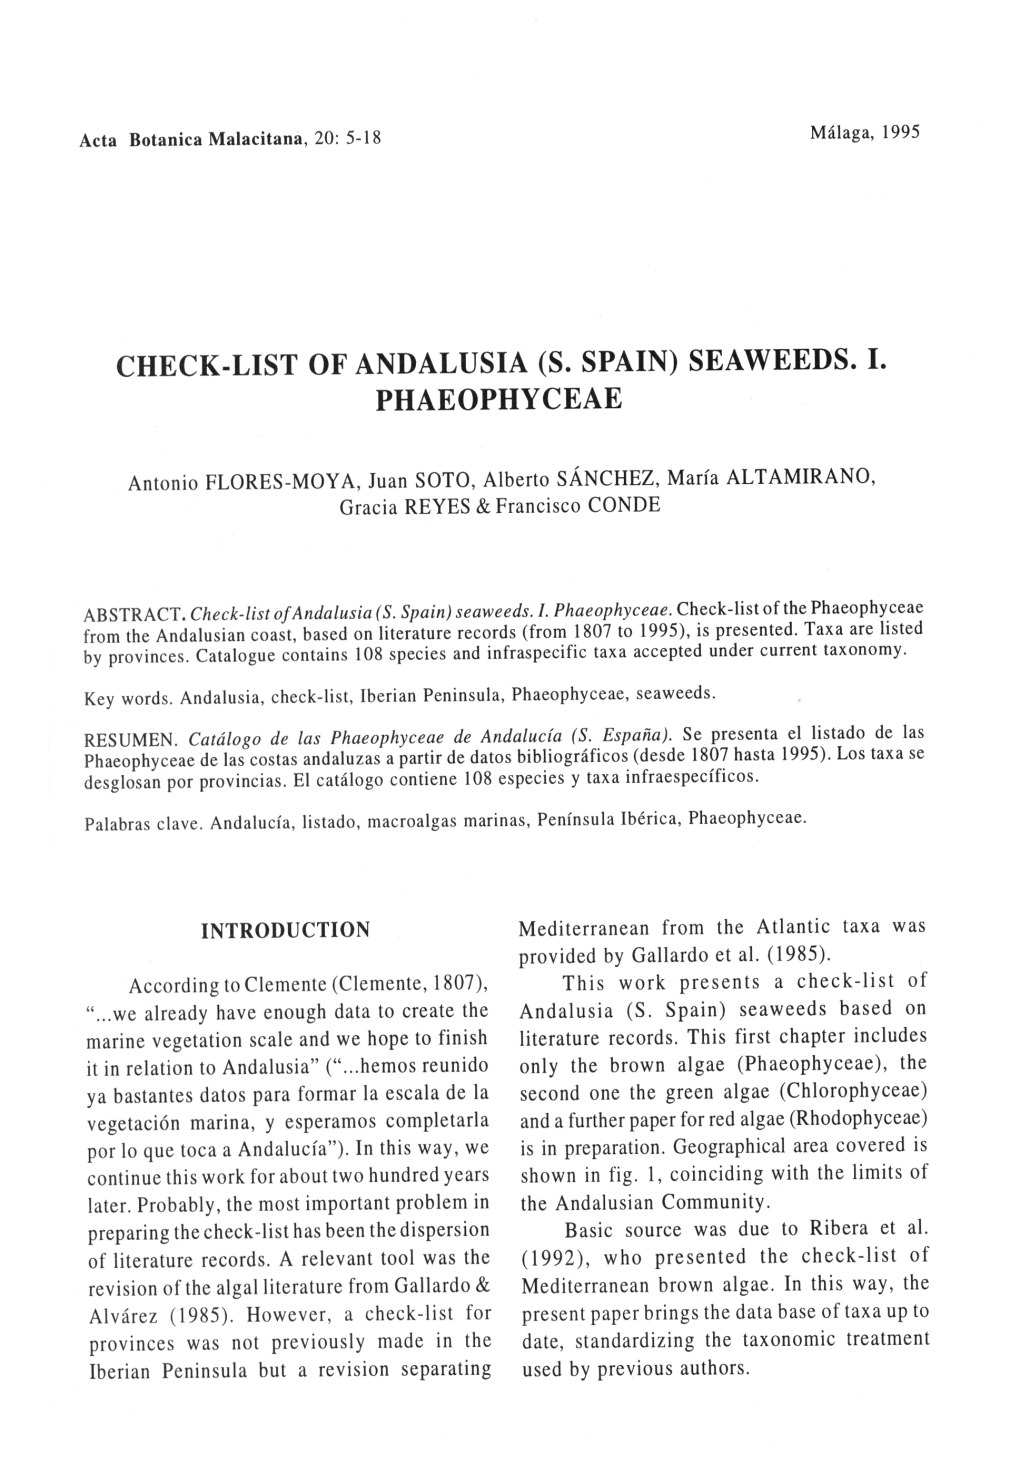 Check-List of Andalusia (S. Spain) Seaweeds. I. Phaeophyceae